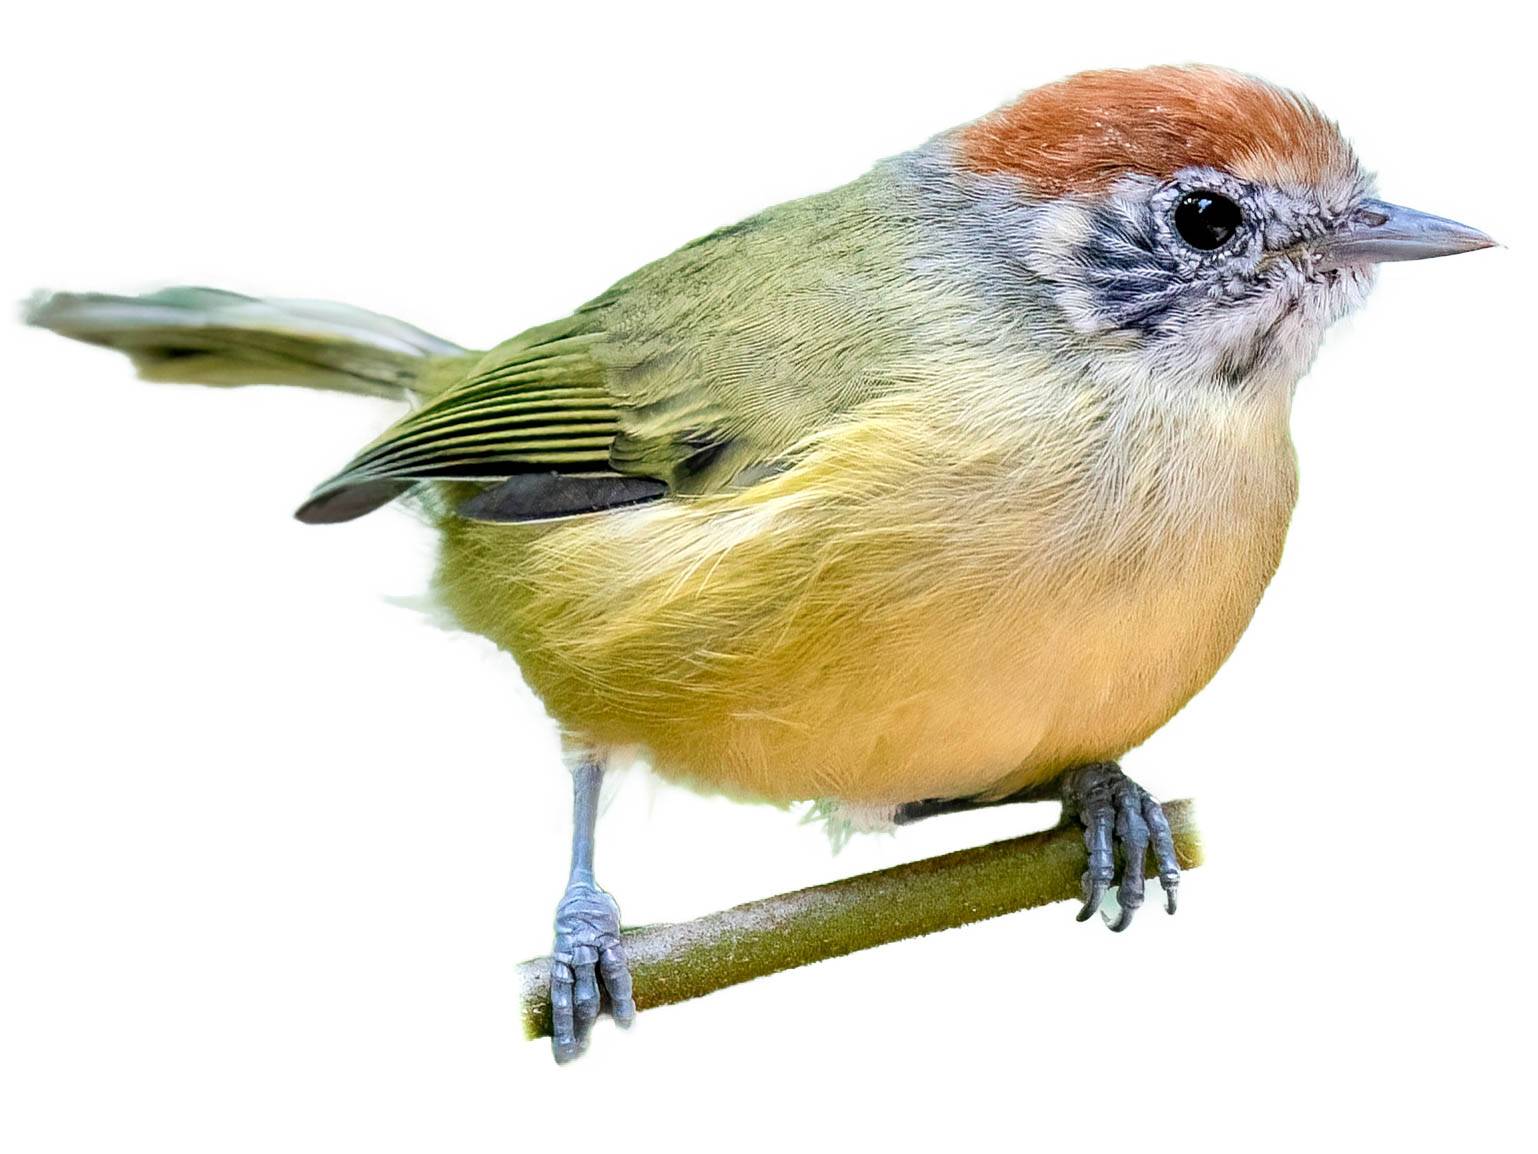 A photo of a Rufous-crowned Greenlet (Hylophilus poicilotis)